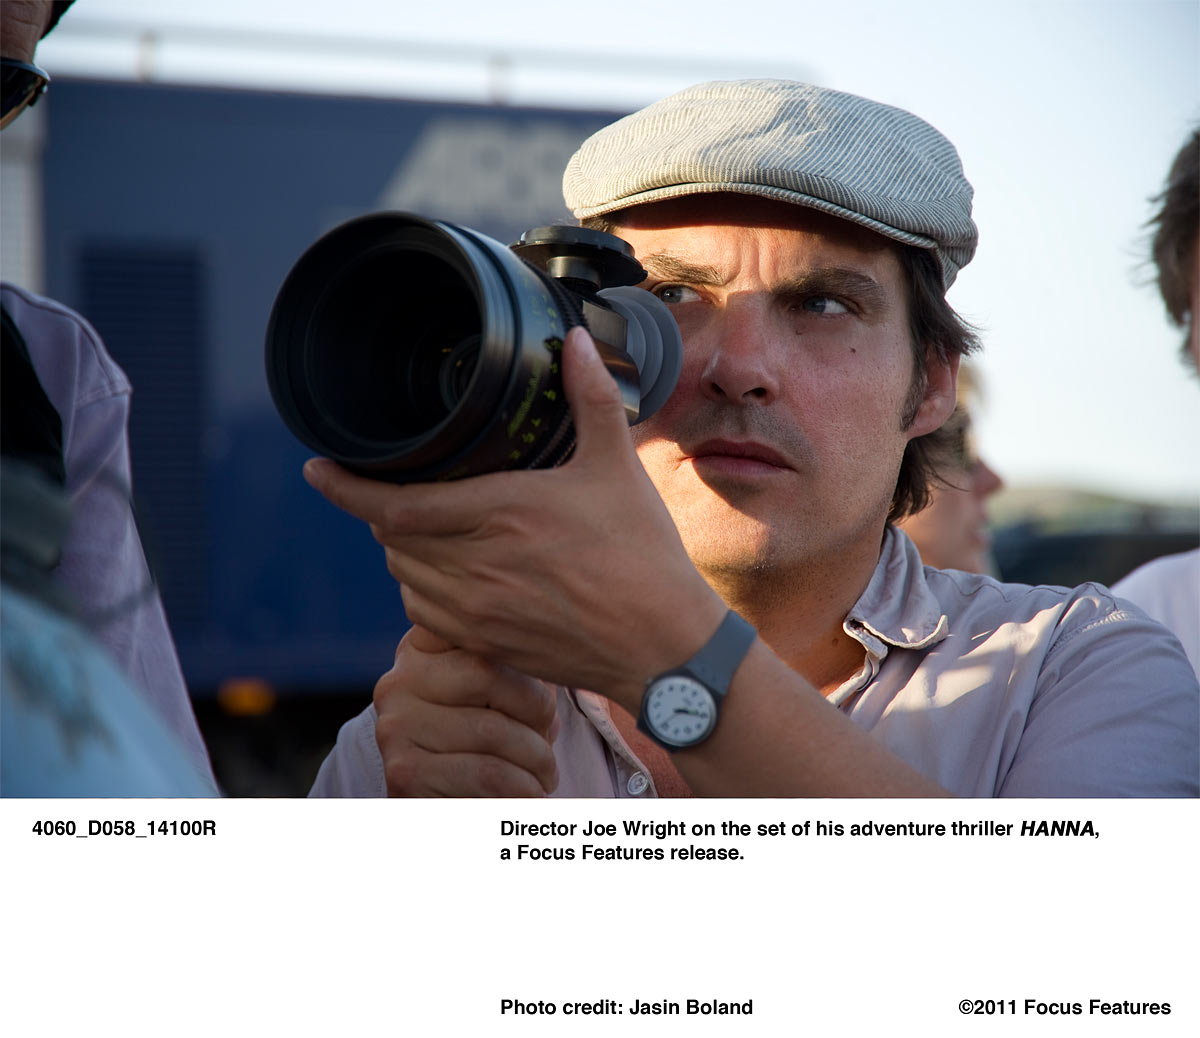 Director Joe Wright on the set of his adventure thriller HANNA, a Focus Features release. Photo credit: Jasin Boland.